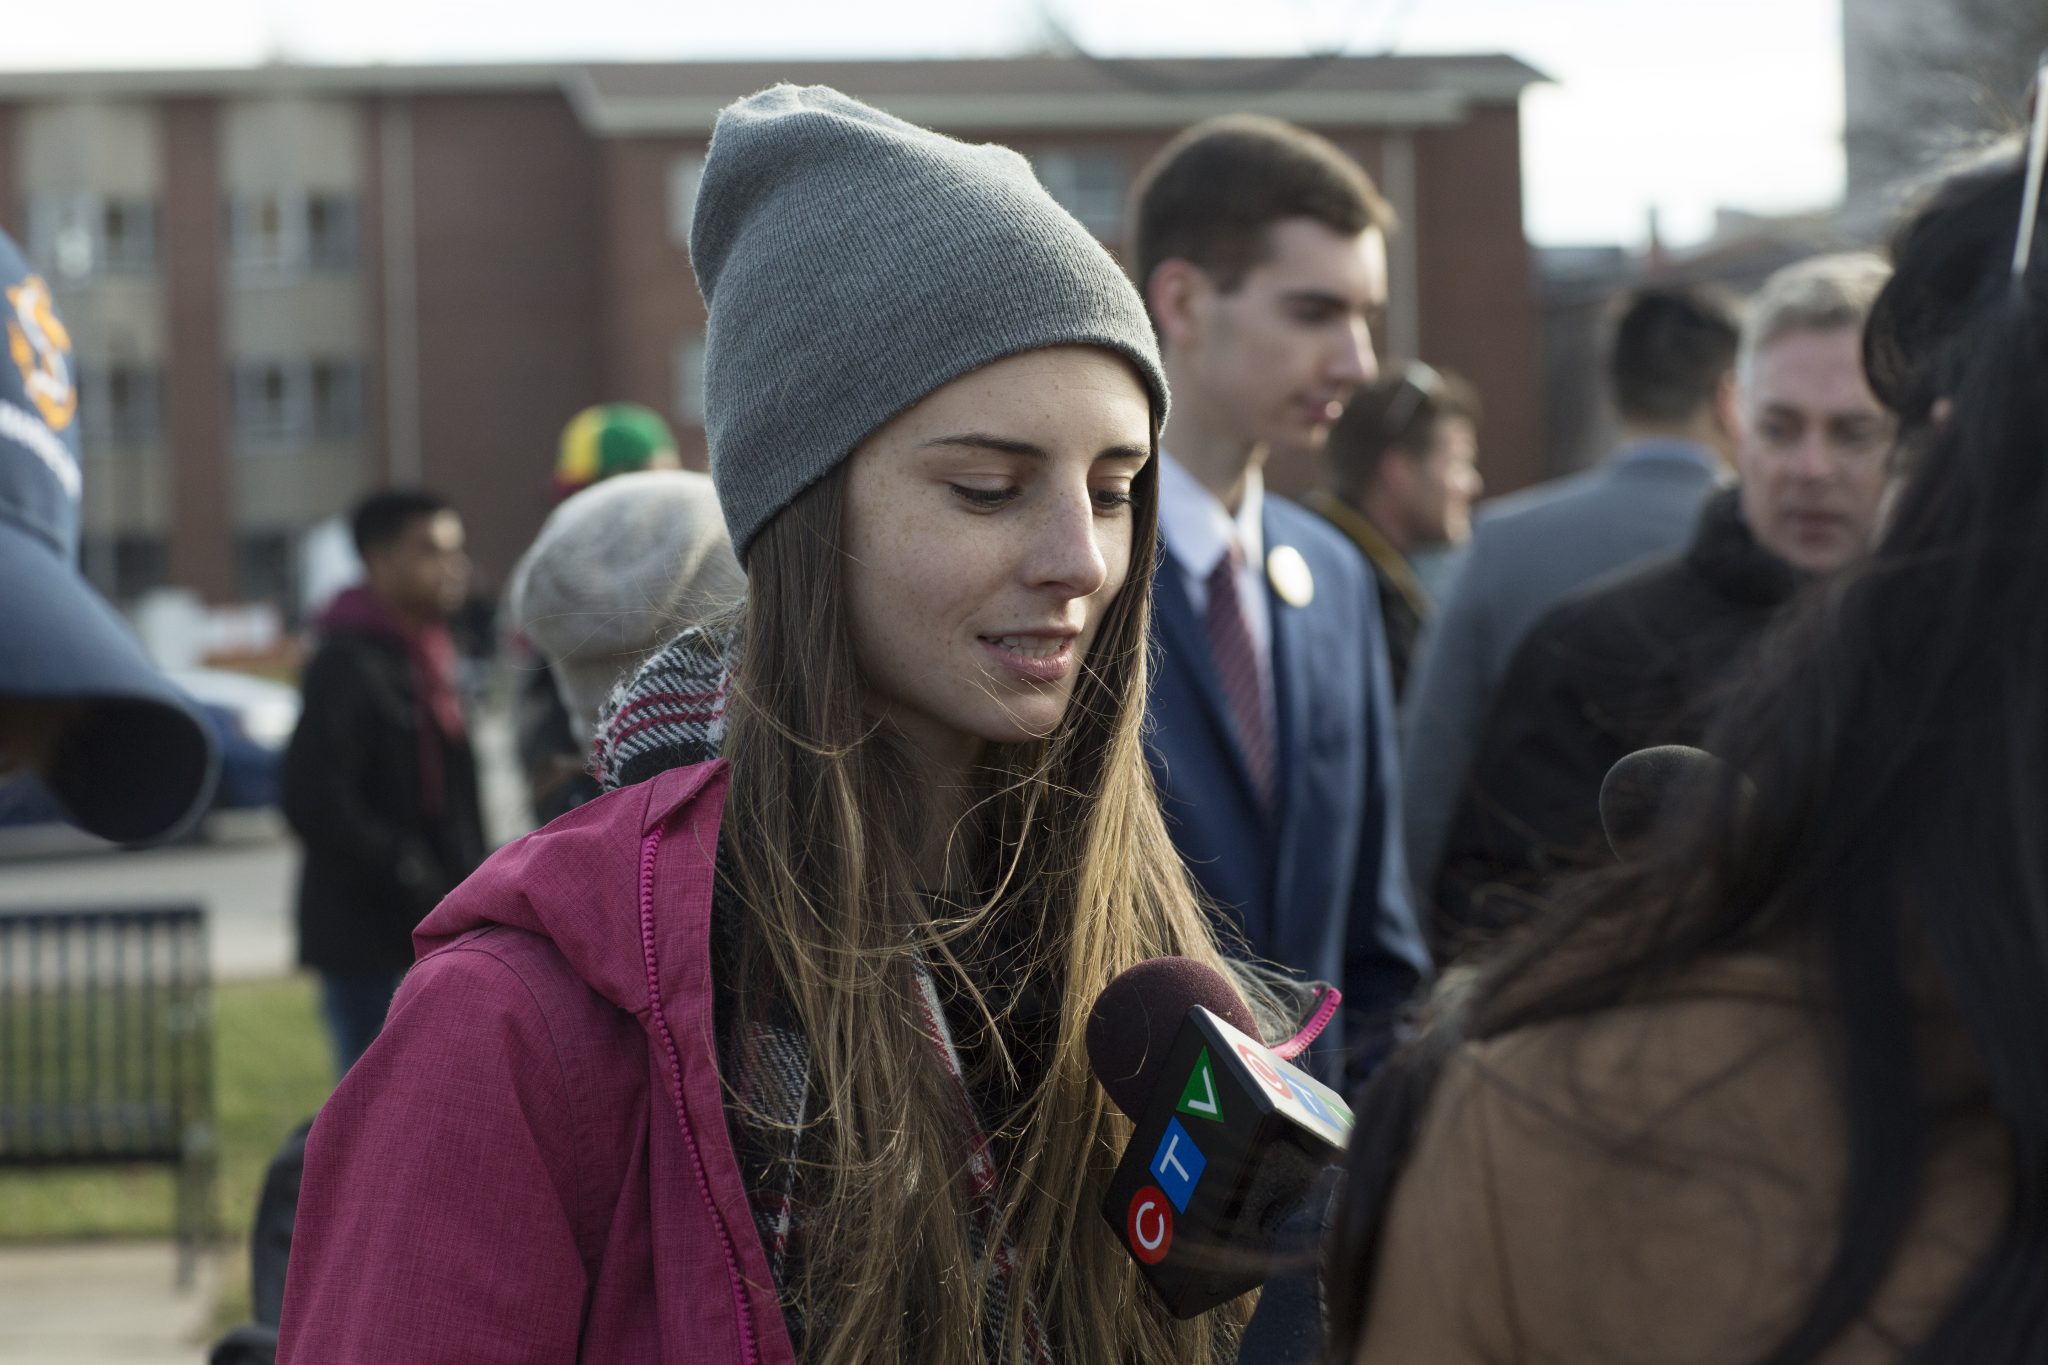 Decimal enhed Konsekvent Lindsay Shepherd retains a lawyer, fact-finding results released and task  force is announced – The Cord